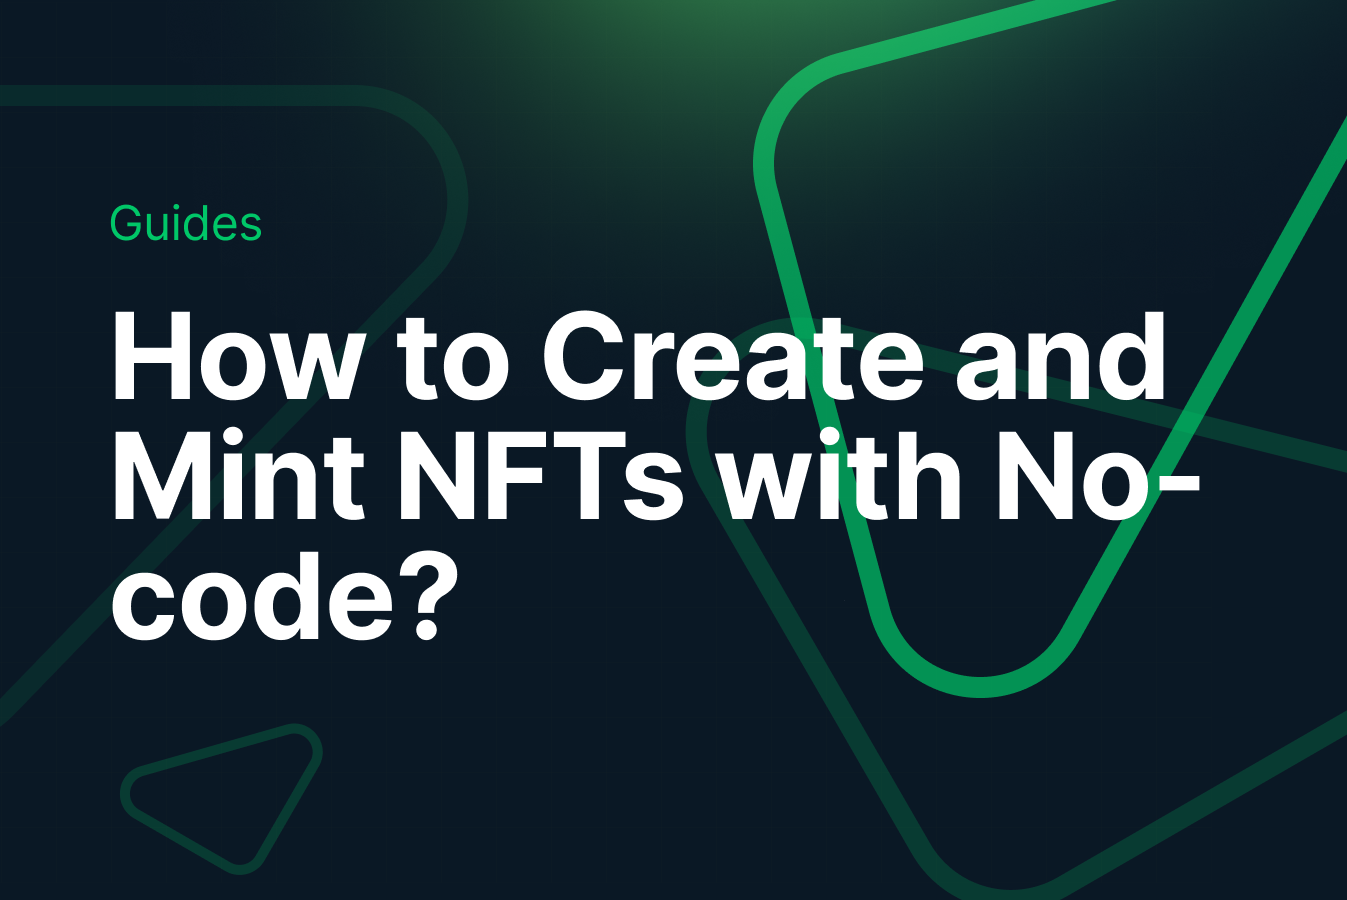 How to Create and Mint NFTs on Polygon